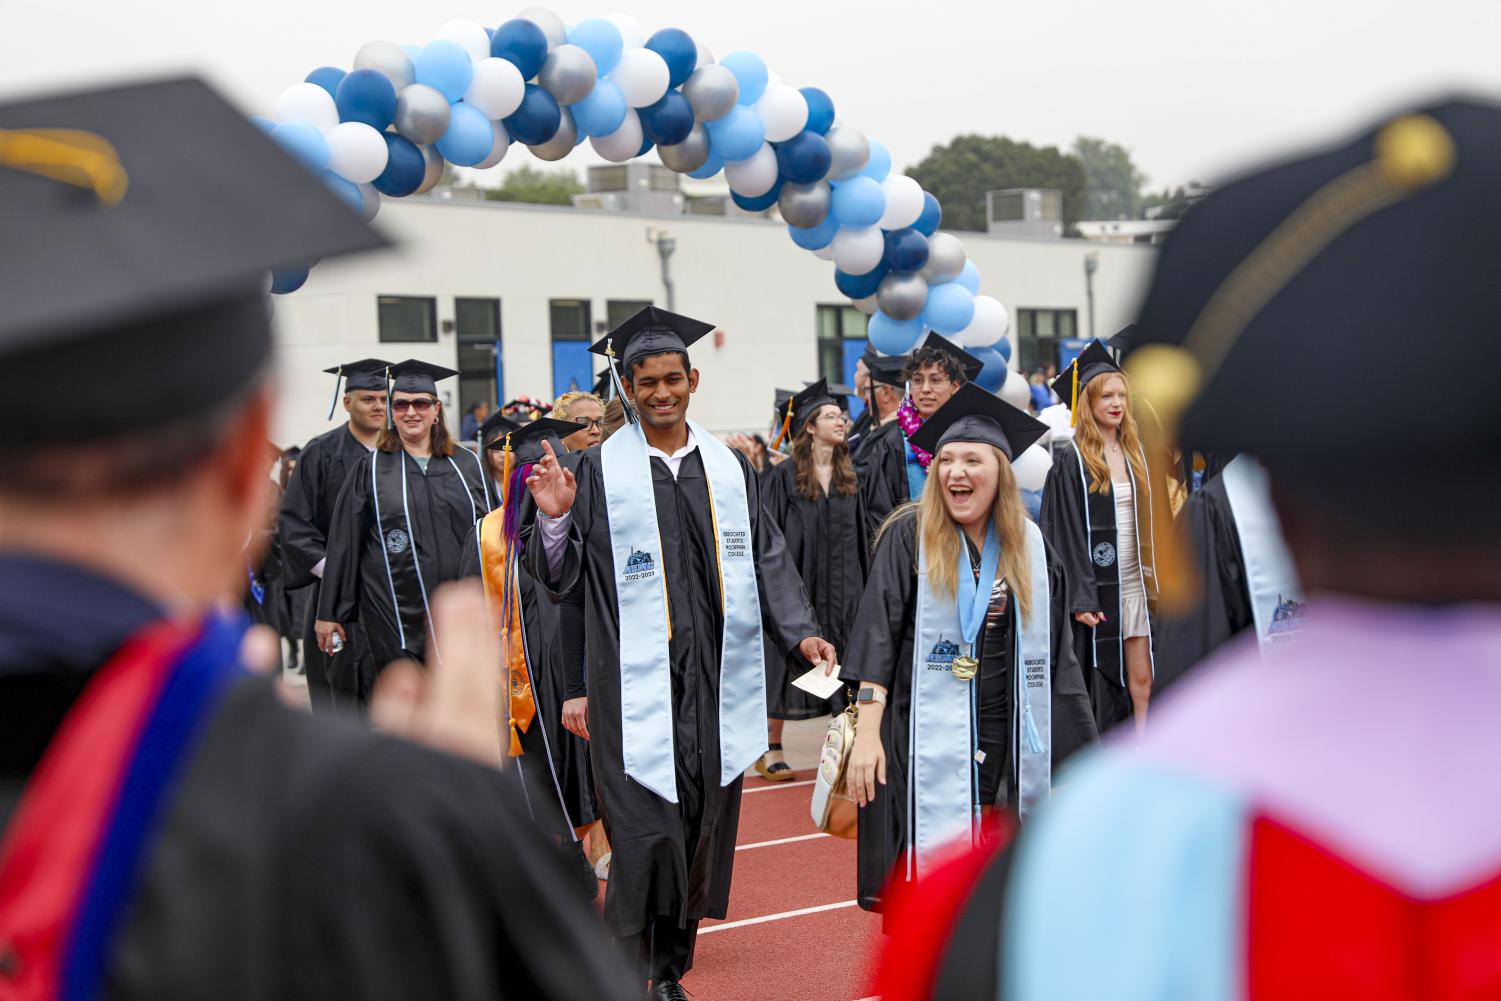 Moorpark College students make their way to the graduation ceremony on Friday, May 19 in Moorpark, CA.